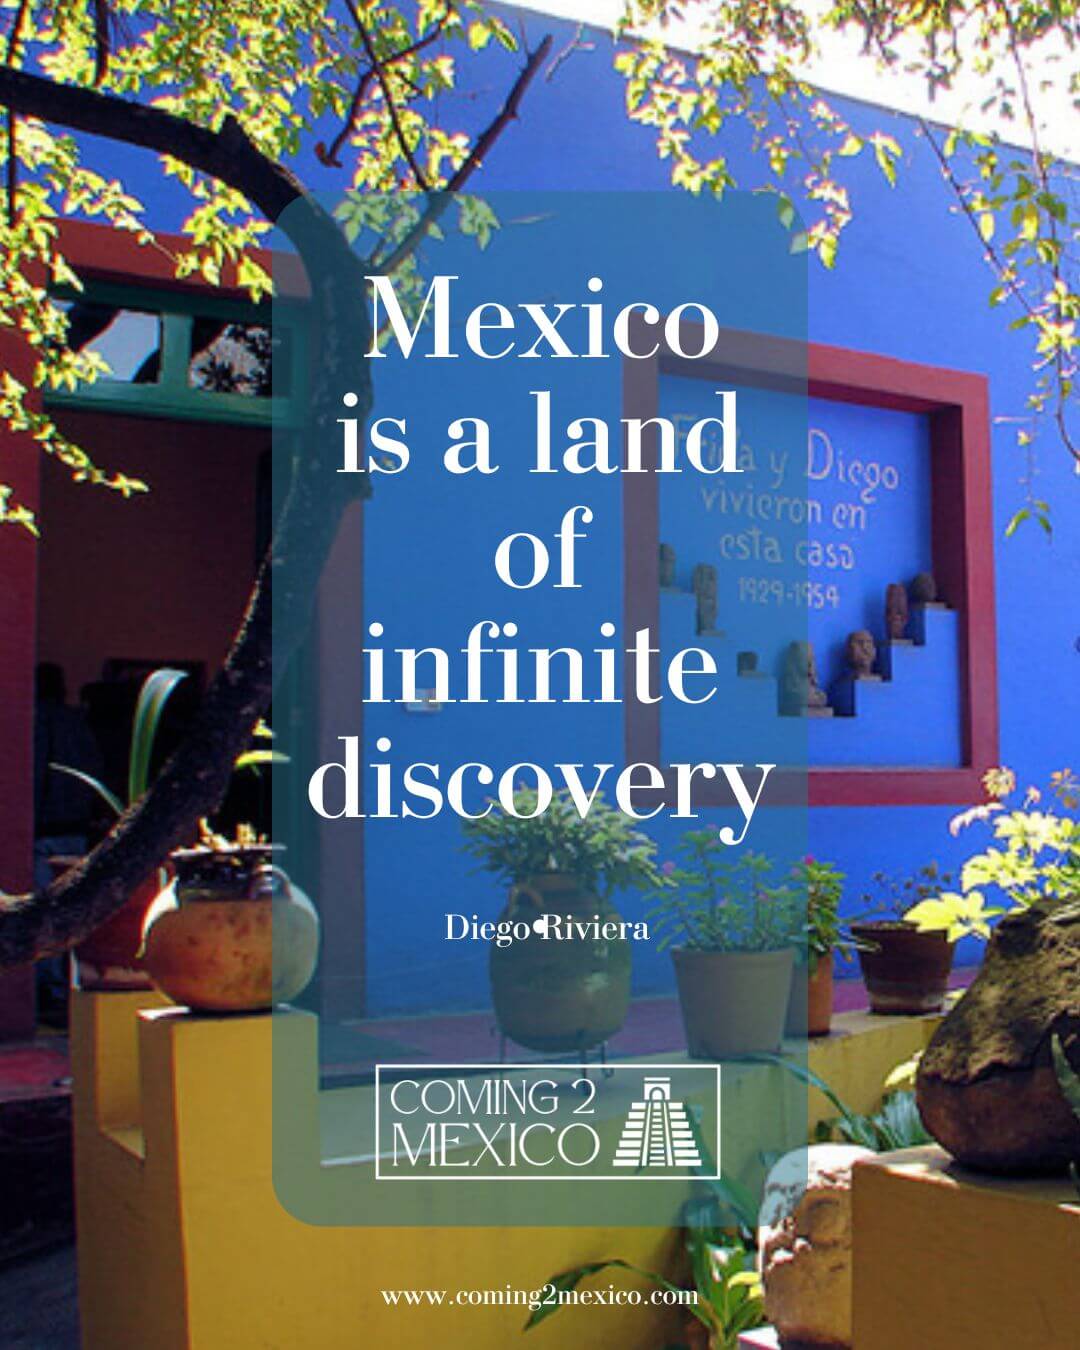 “Mexico is a land of infinite discovery.” – Diego Rivera